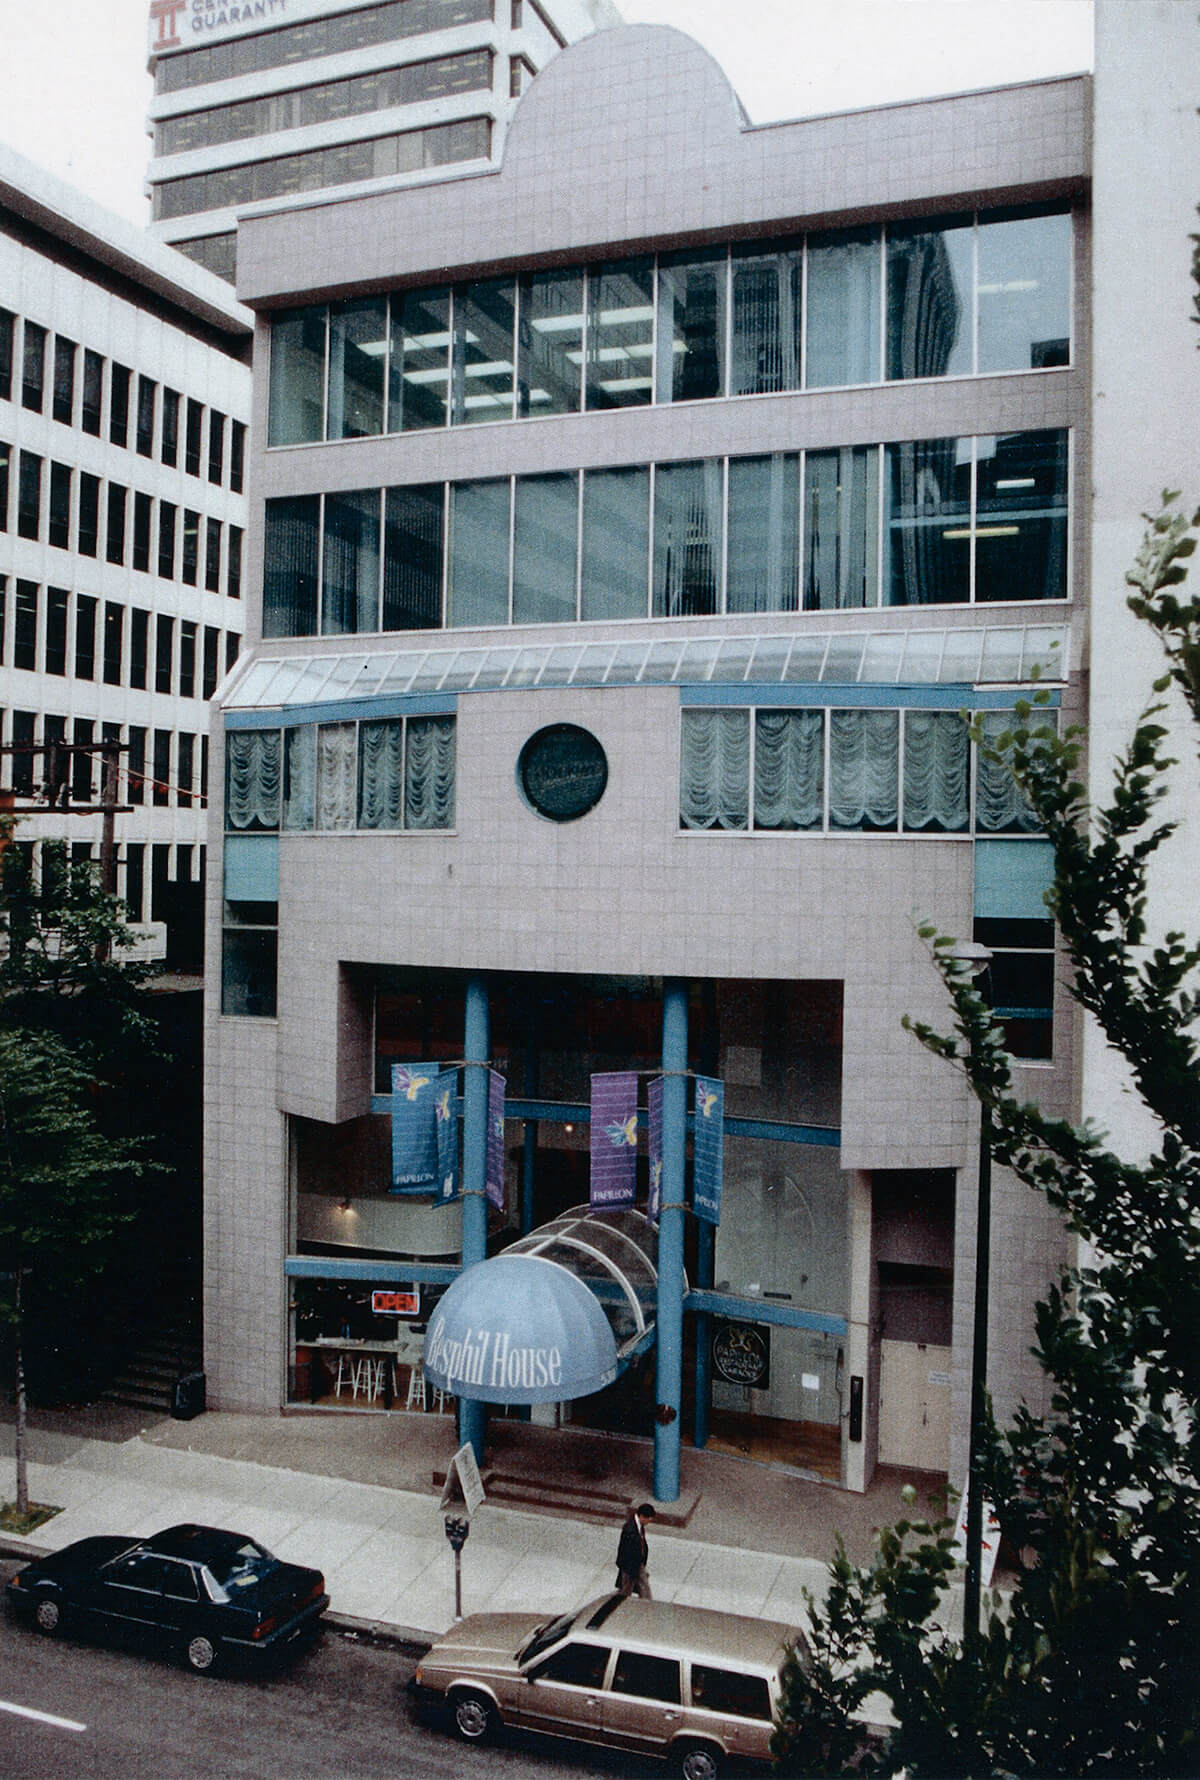 Small office building in Vancouver, B.C., Canada